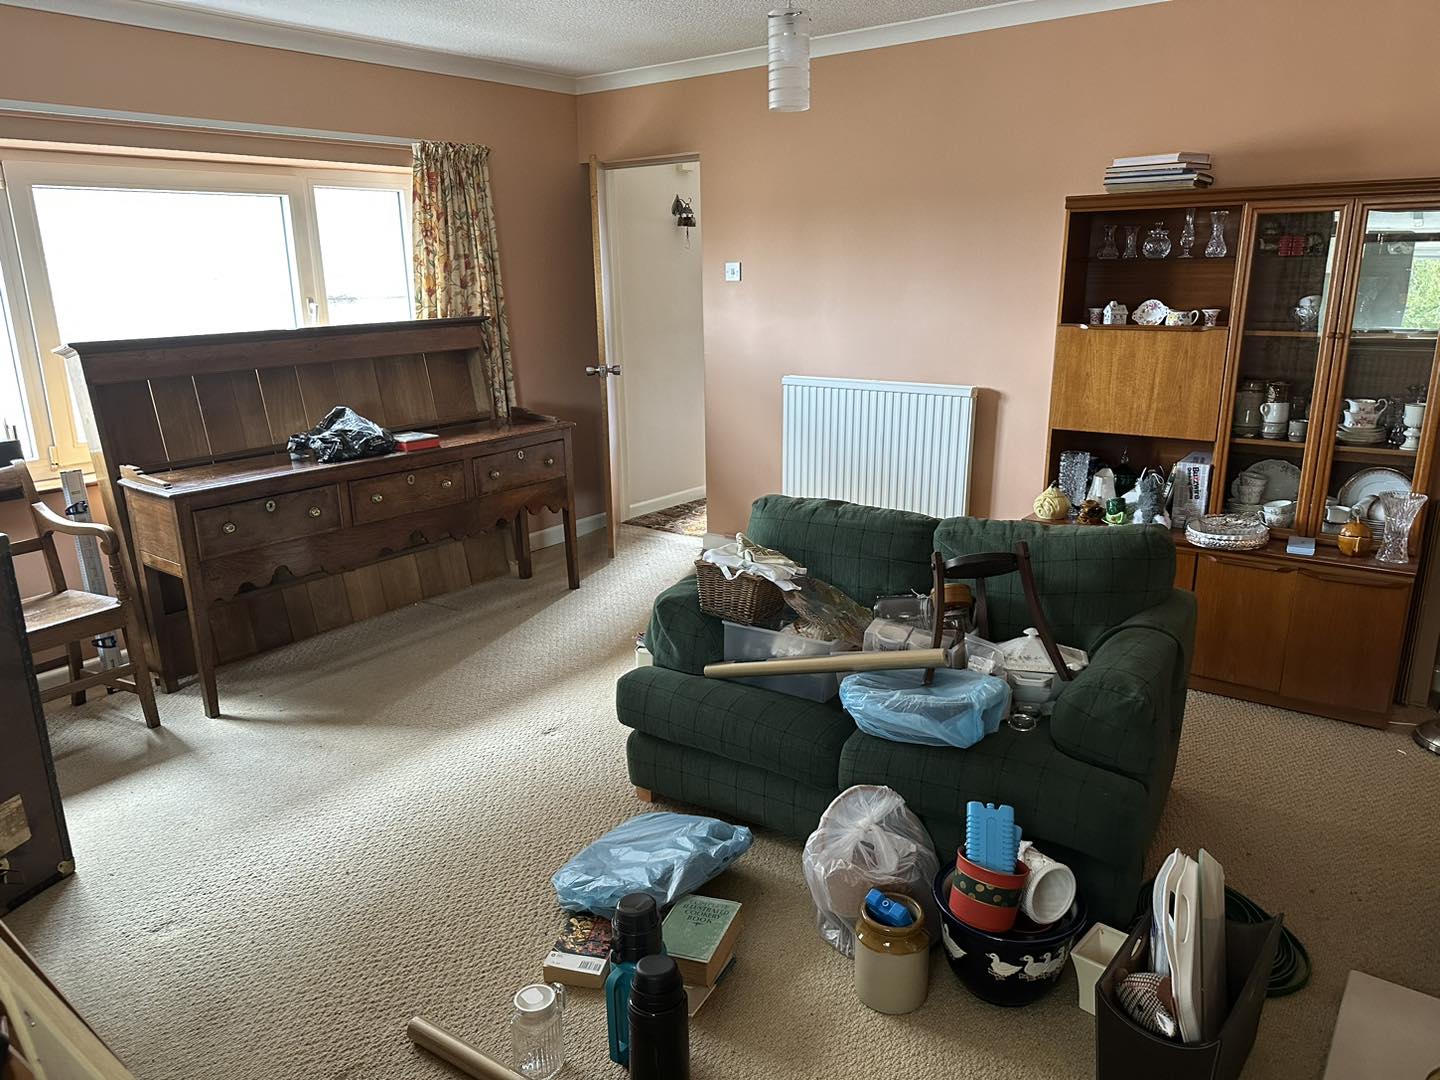 A photo of a house living room full of items